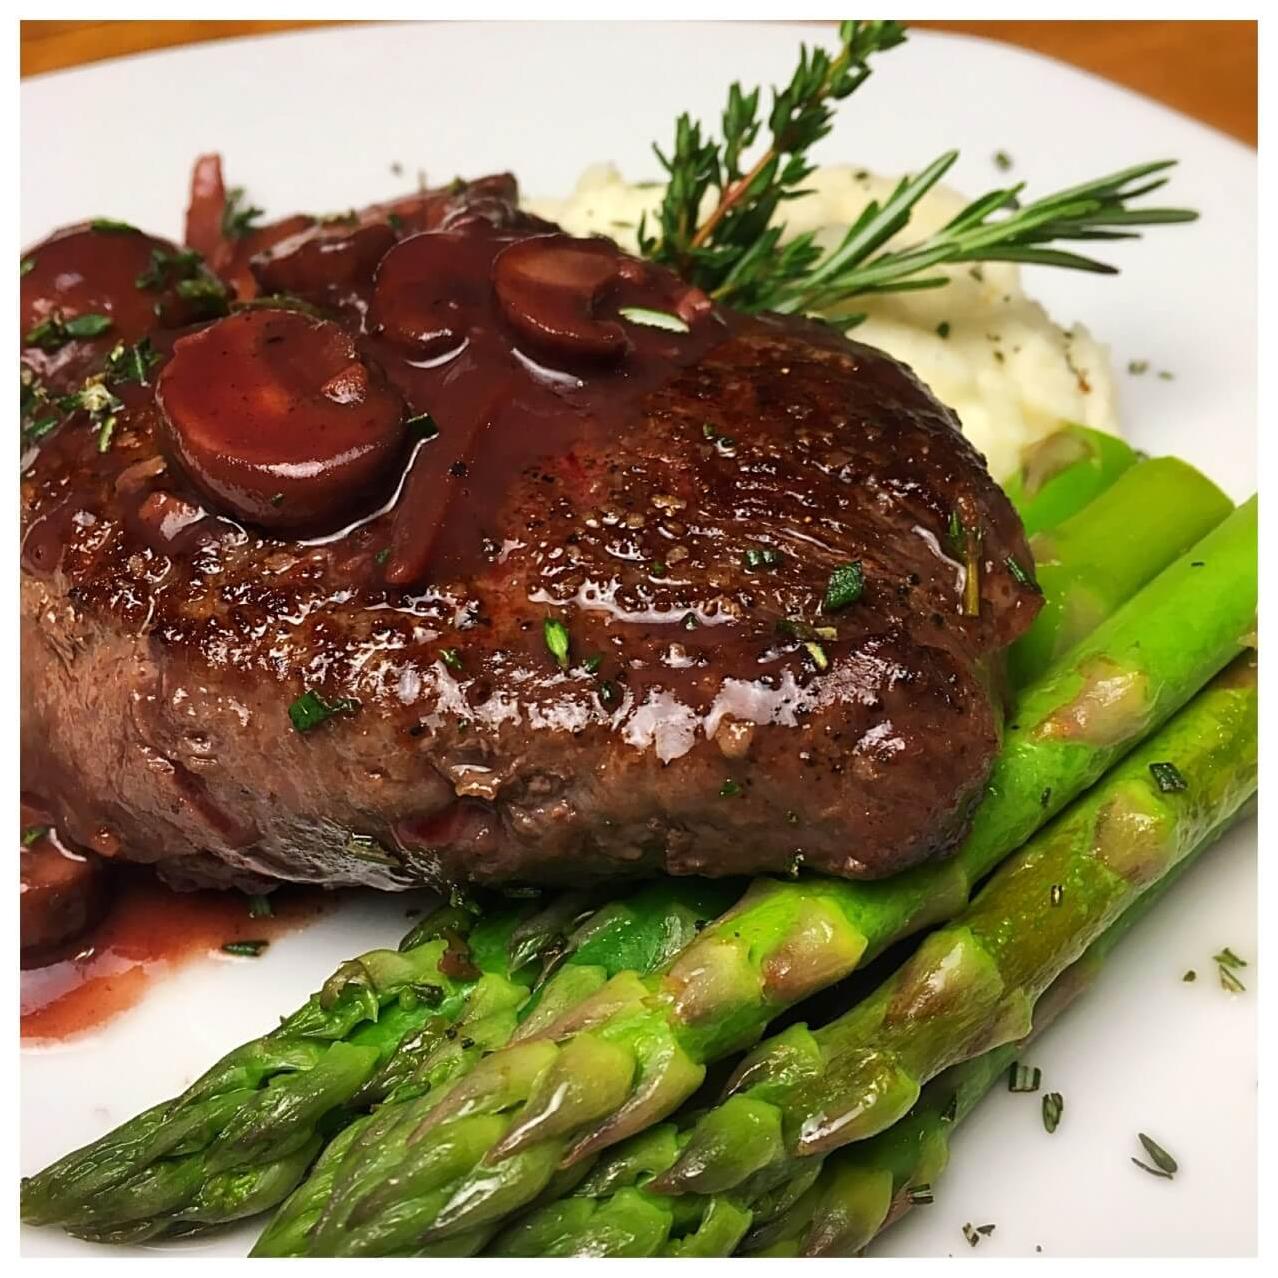  Take your steak to the next level with our umami mushroom sauce